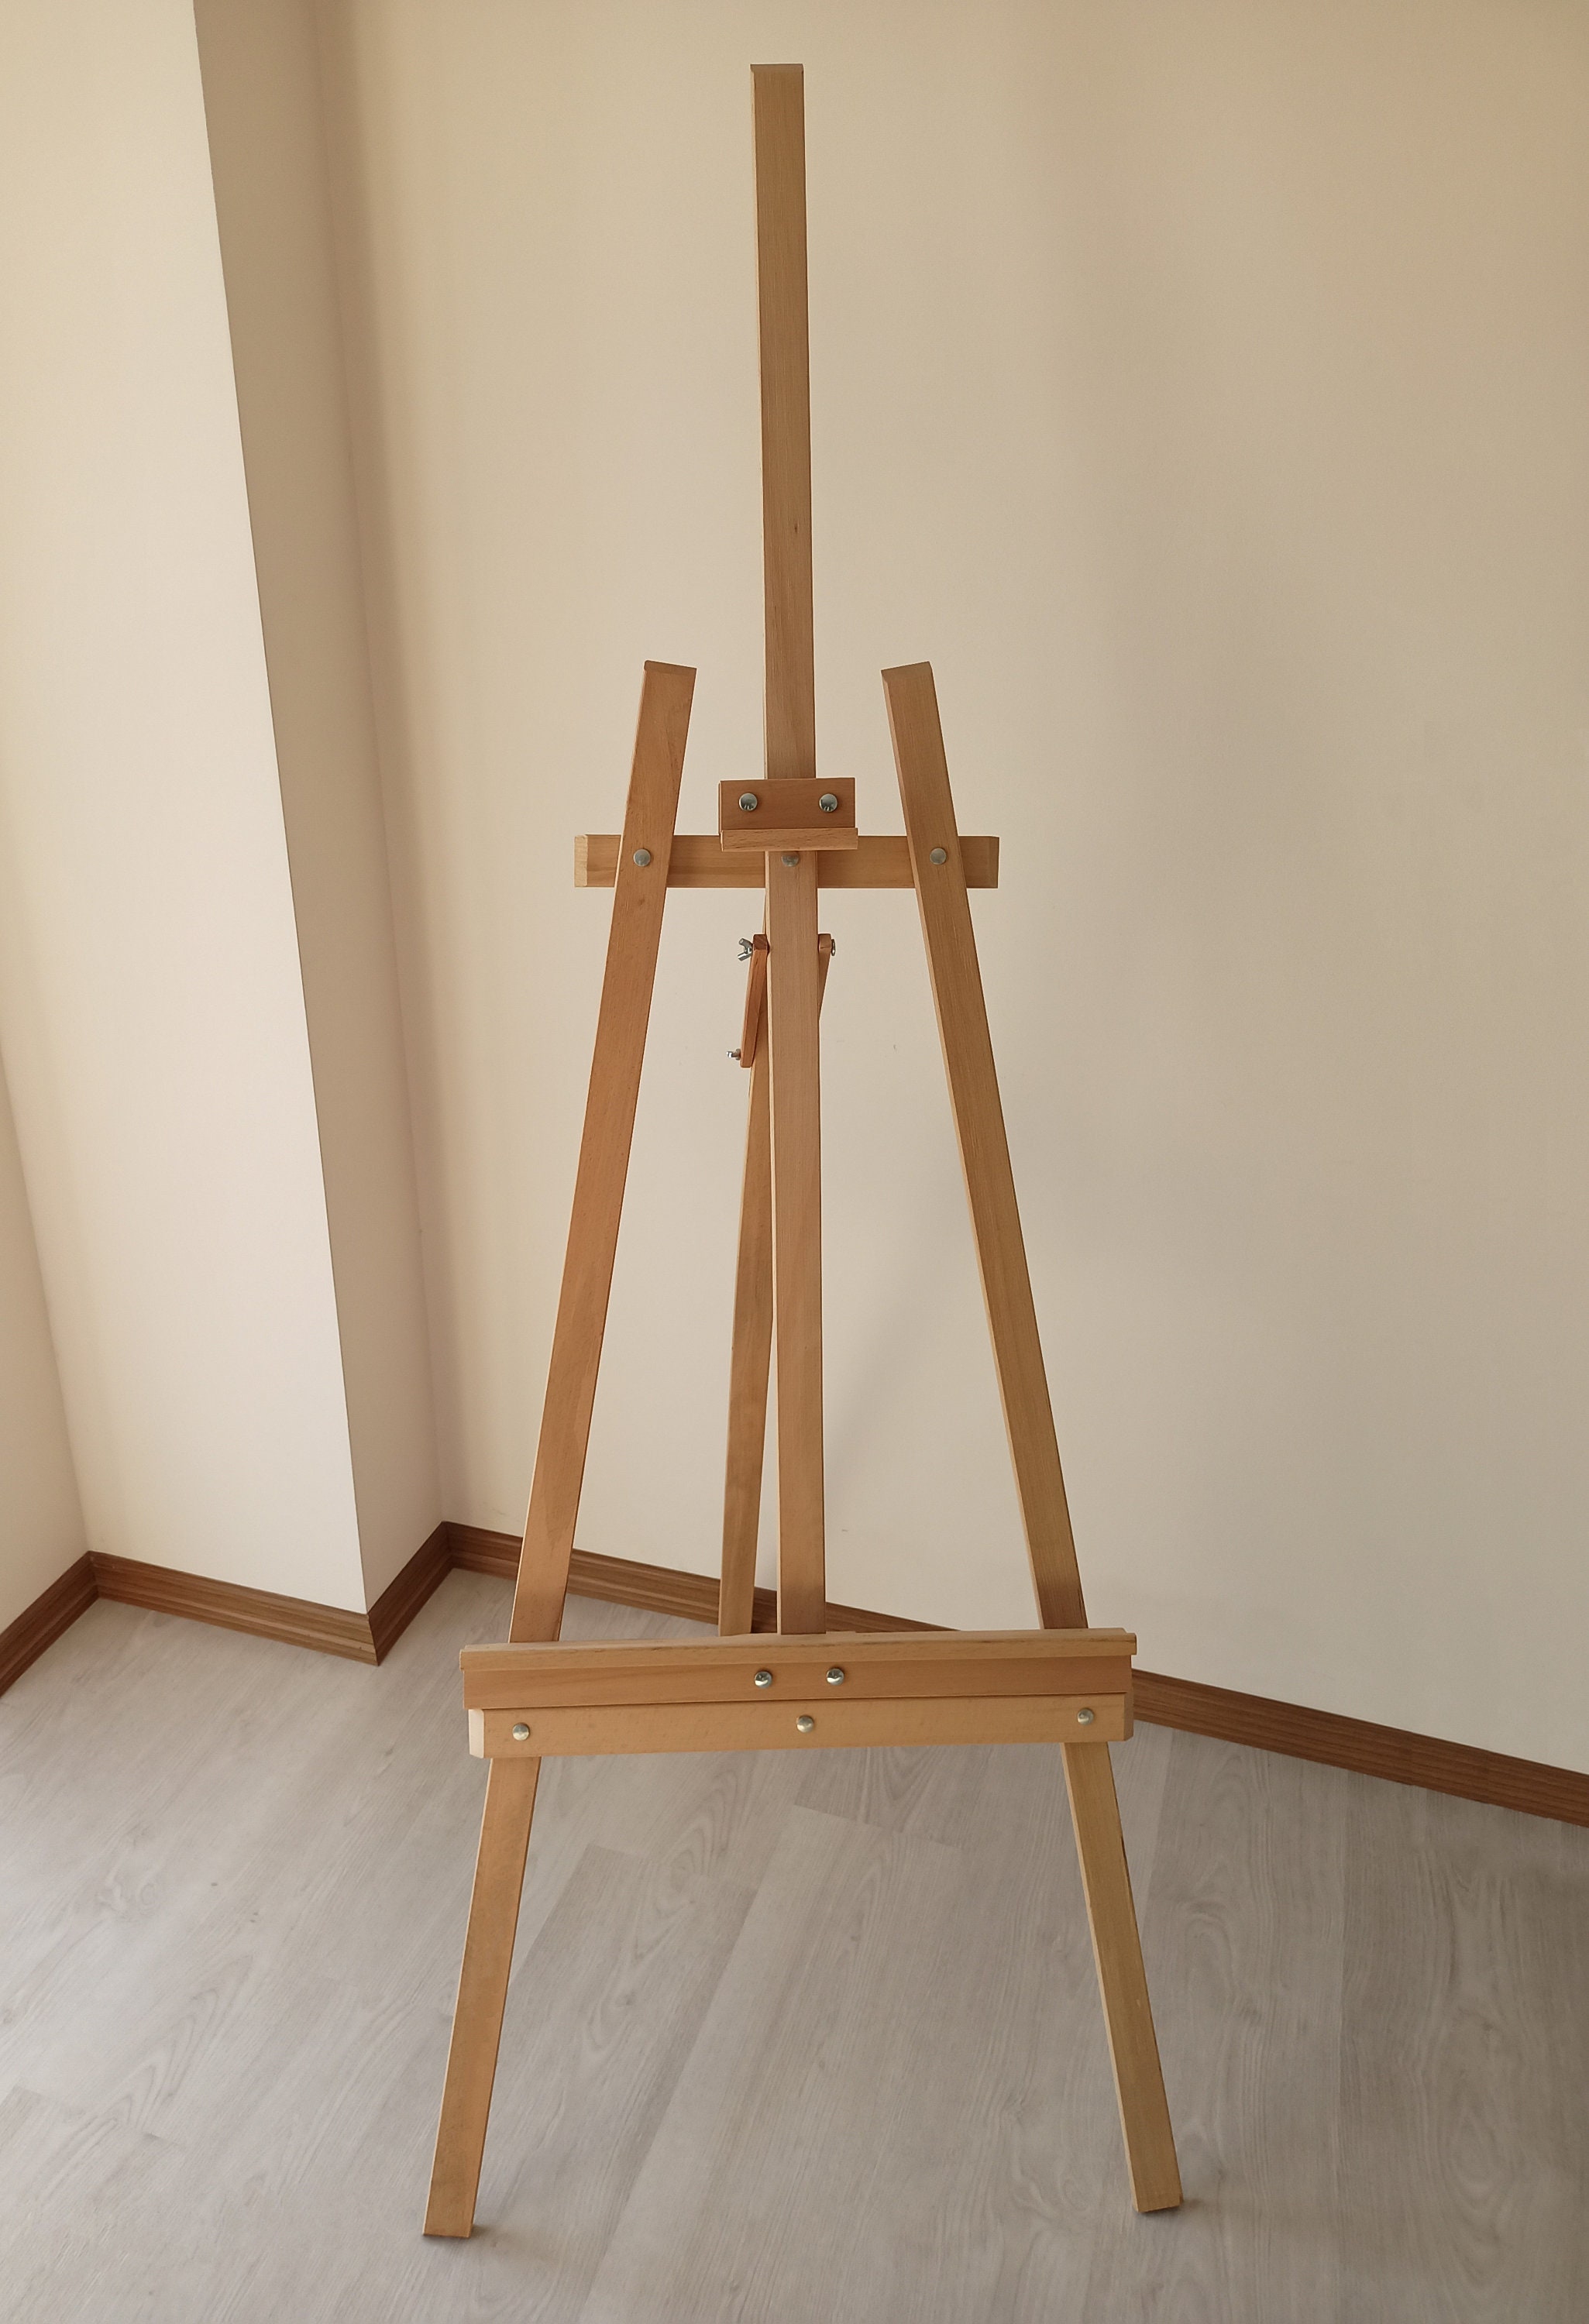 12 Pack 5 Inch Mini Wood Display Easel Natural Wooden Tripod Holder Stand  For Displaying Small Canvases And Photos - AliExpress